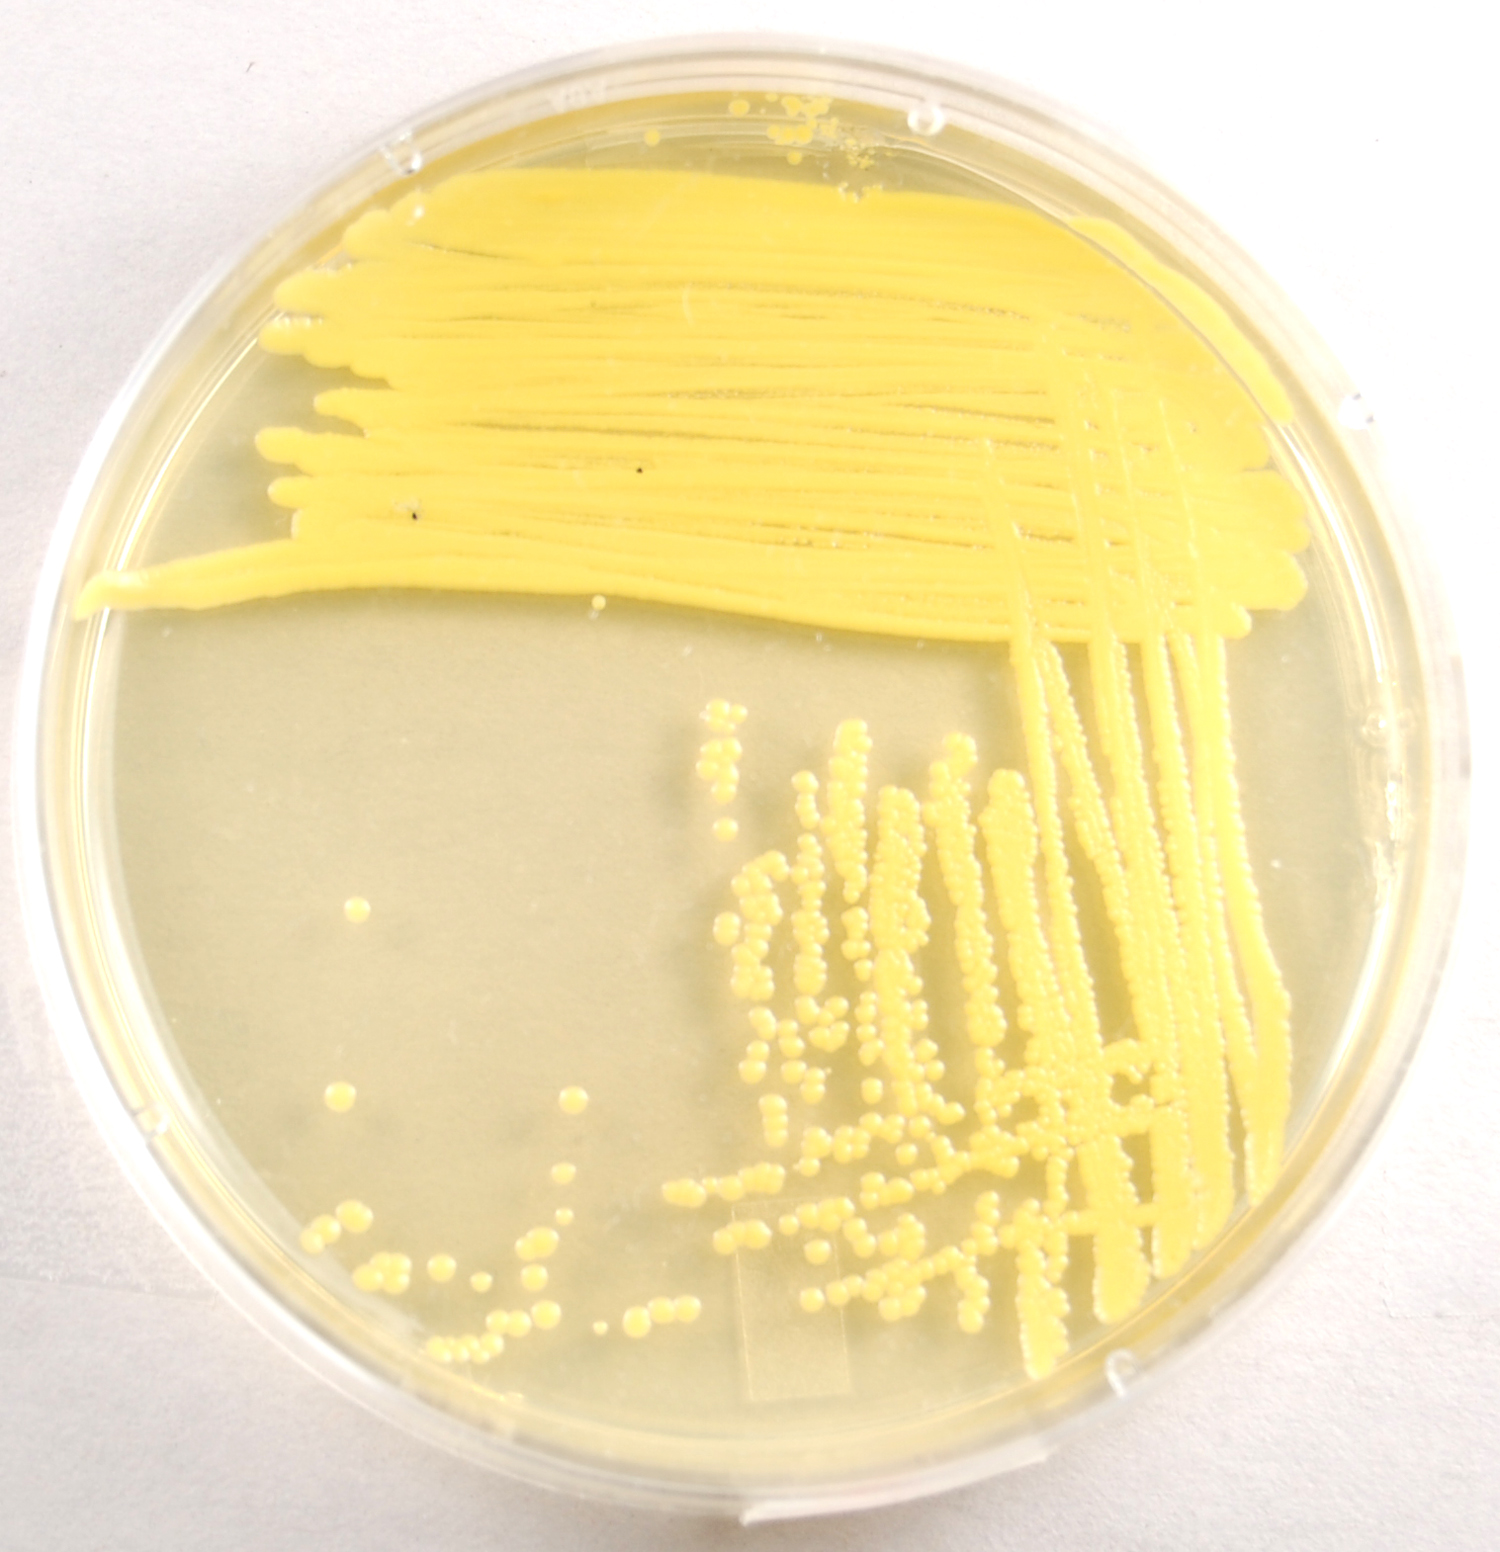 Photograph of a TSA plate culture of <i>Micrococcus luteus</i> showing its yellow, water insoluble pigment.